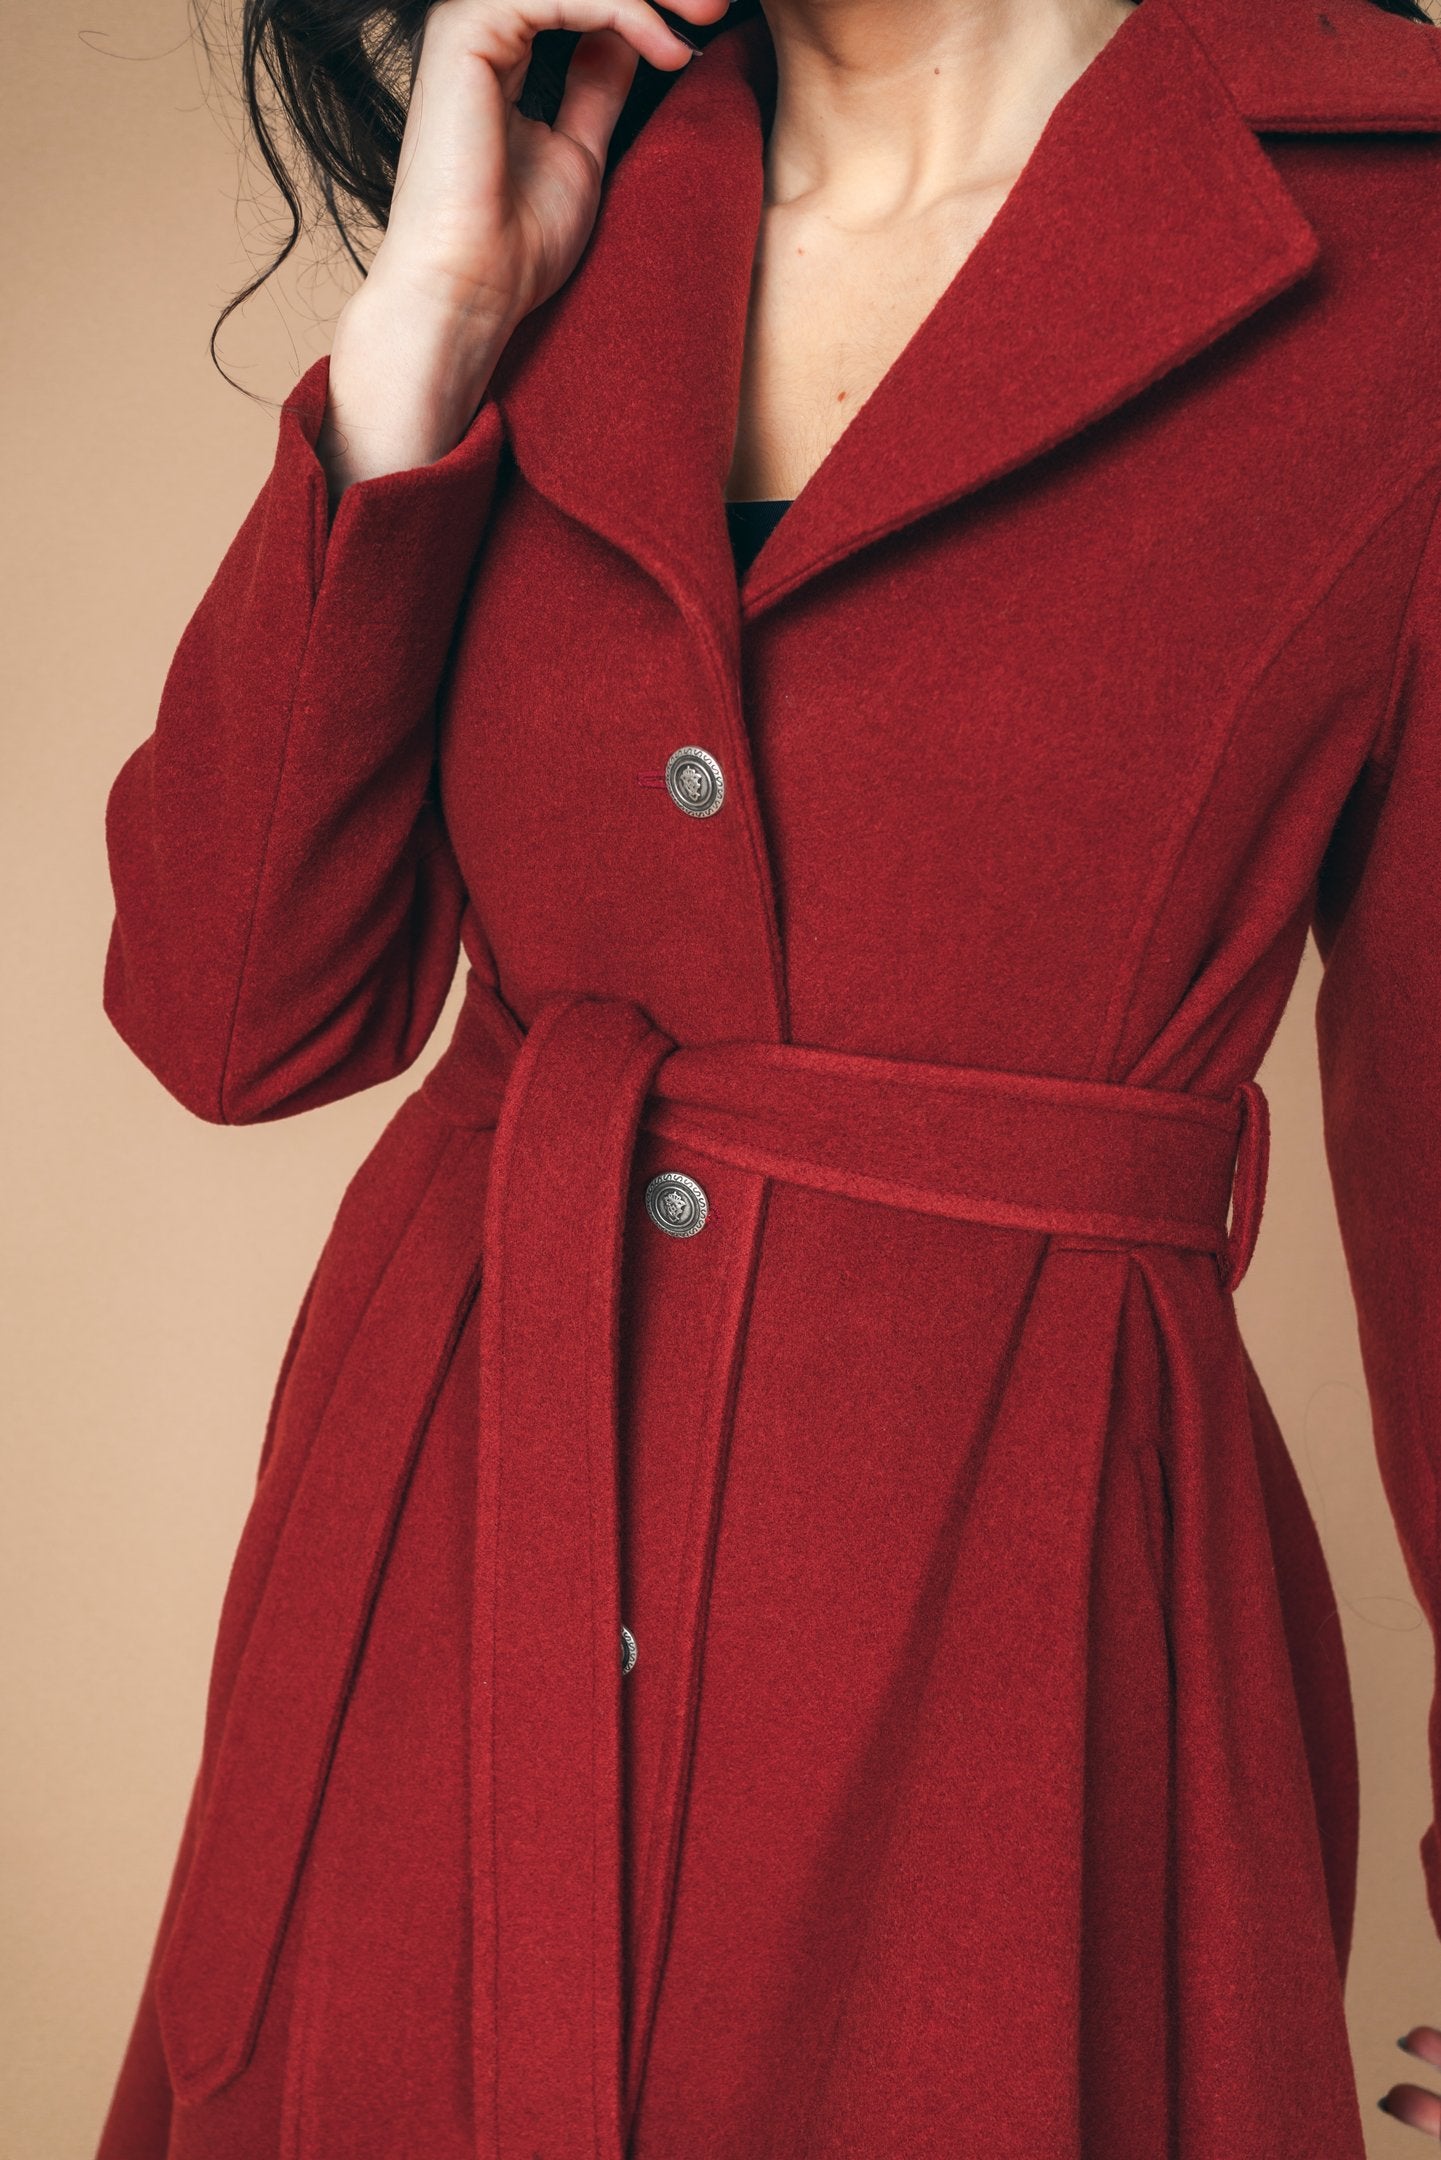 "Sloane" Coat 100% Wool With Lining in Red Brick Colour - front zoomed torso